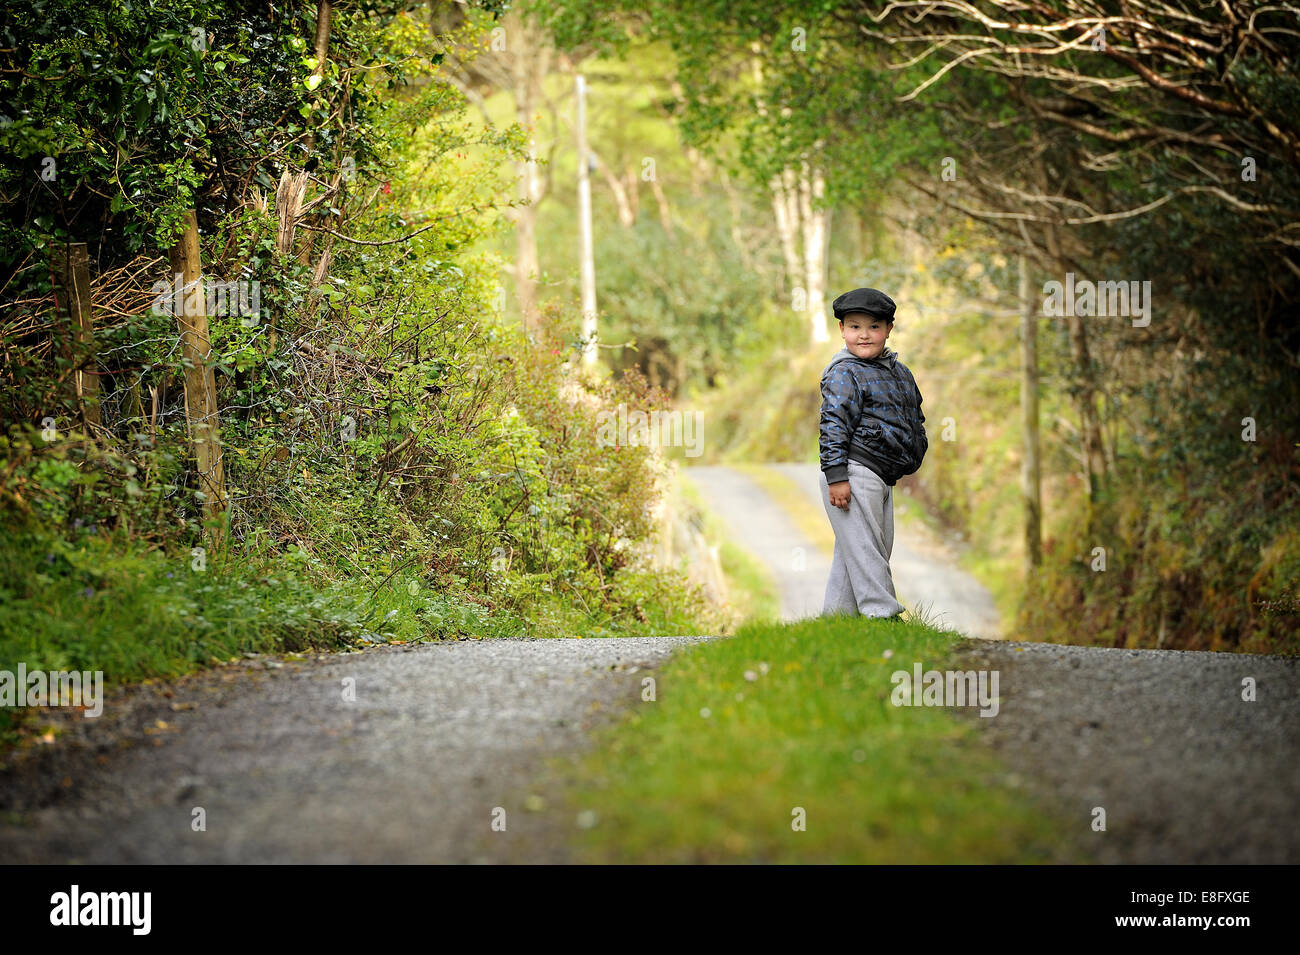 Boy standing in the middle of country road Stock Photo